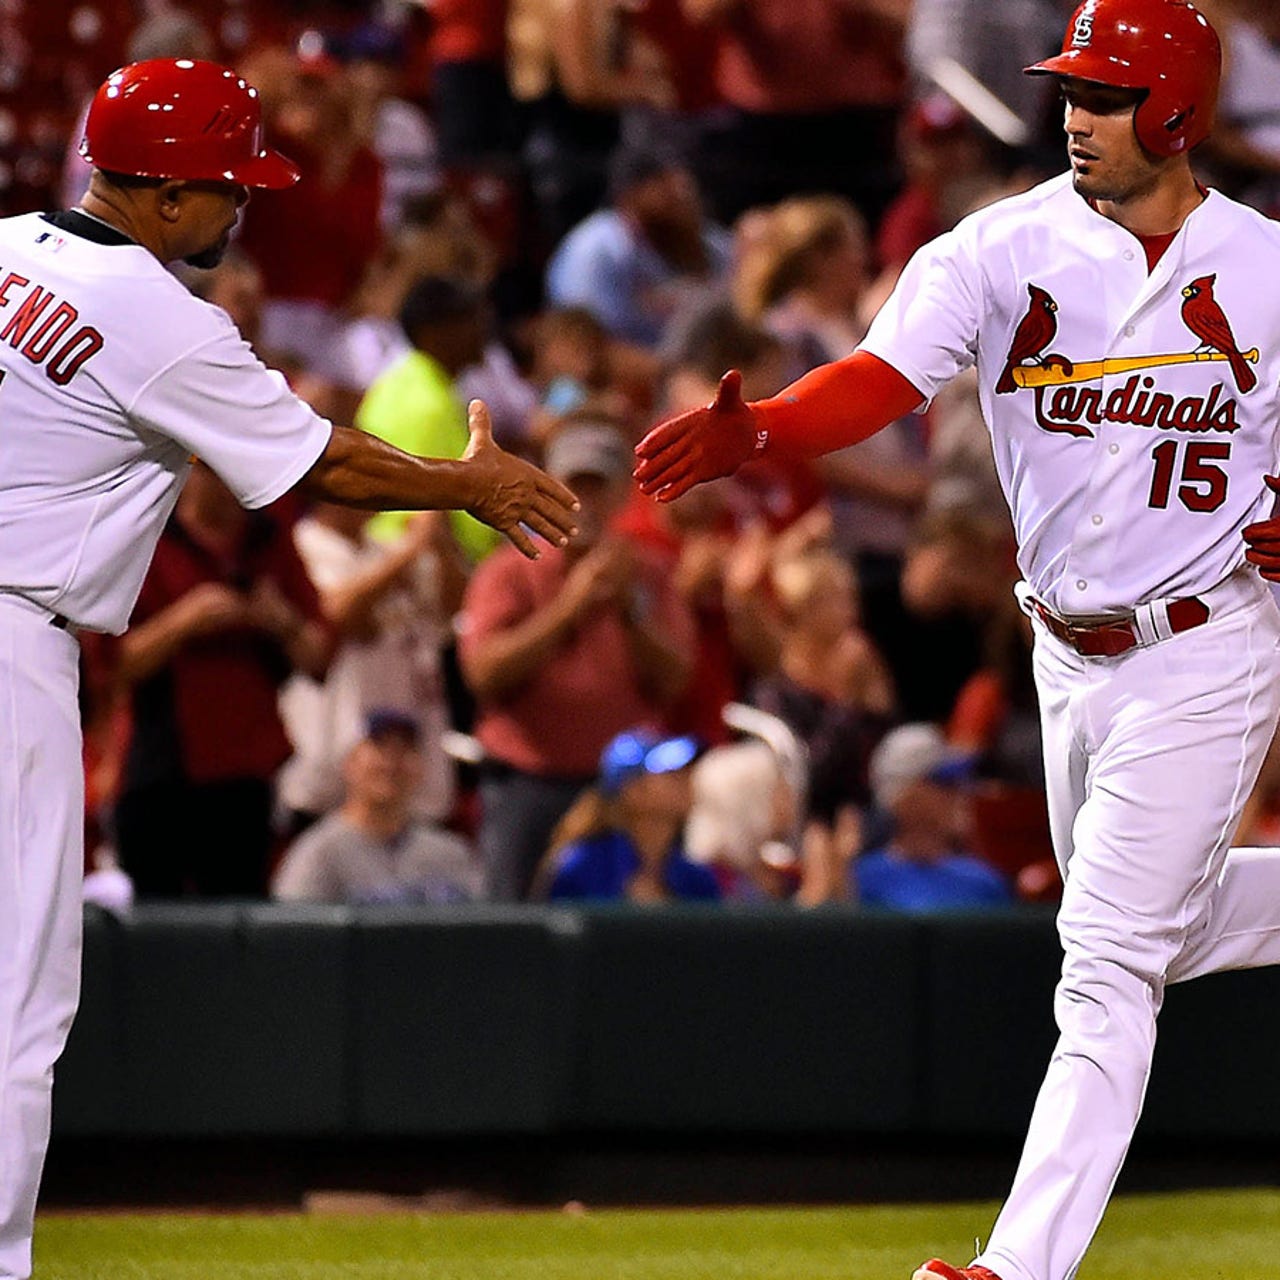 Grichuk can't throw with effort, but Cardinals hope it won't